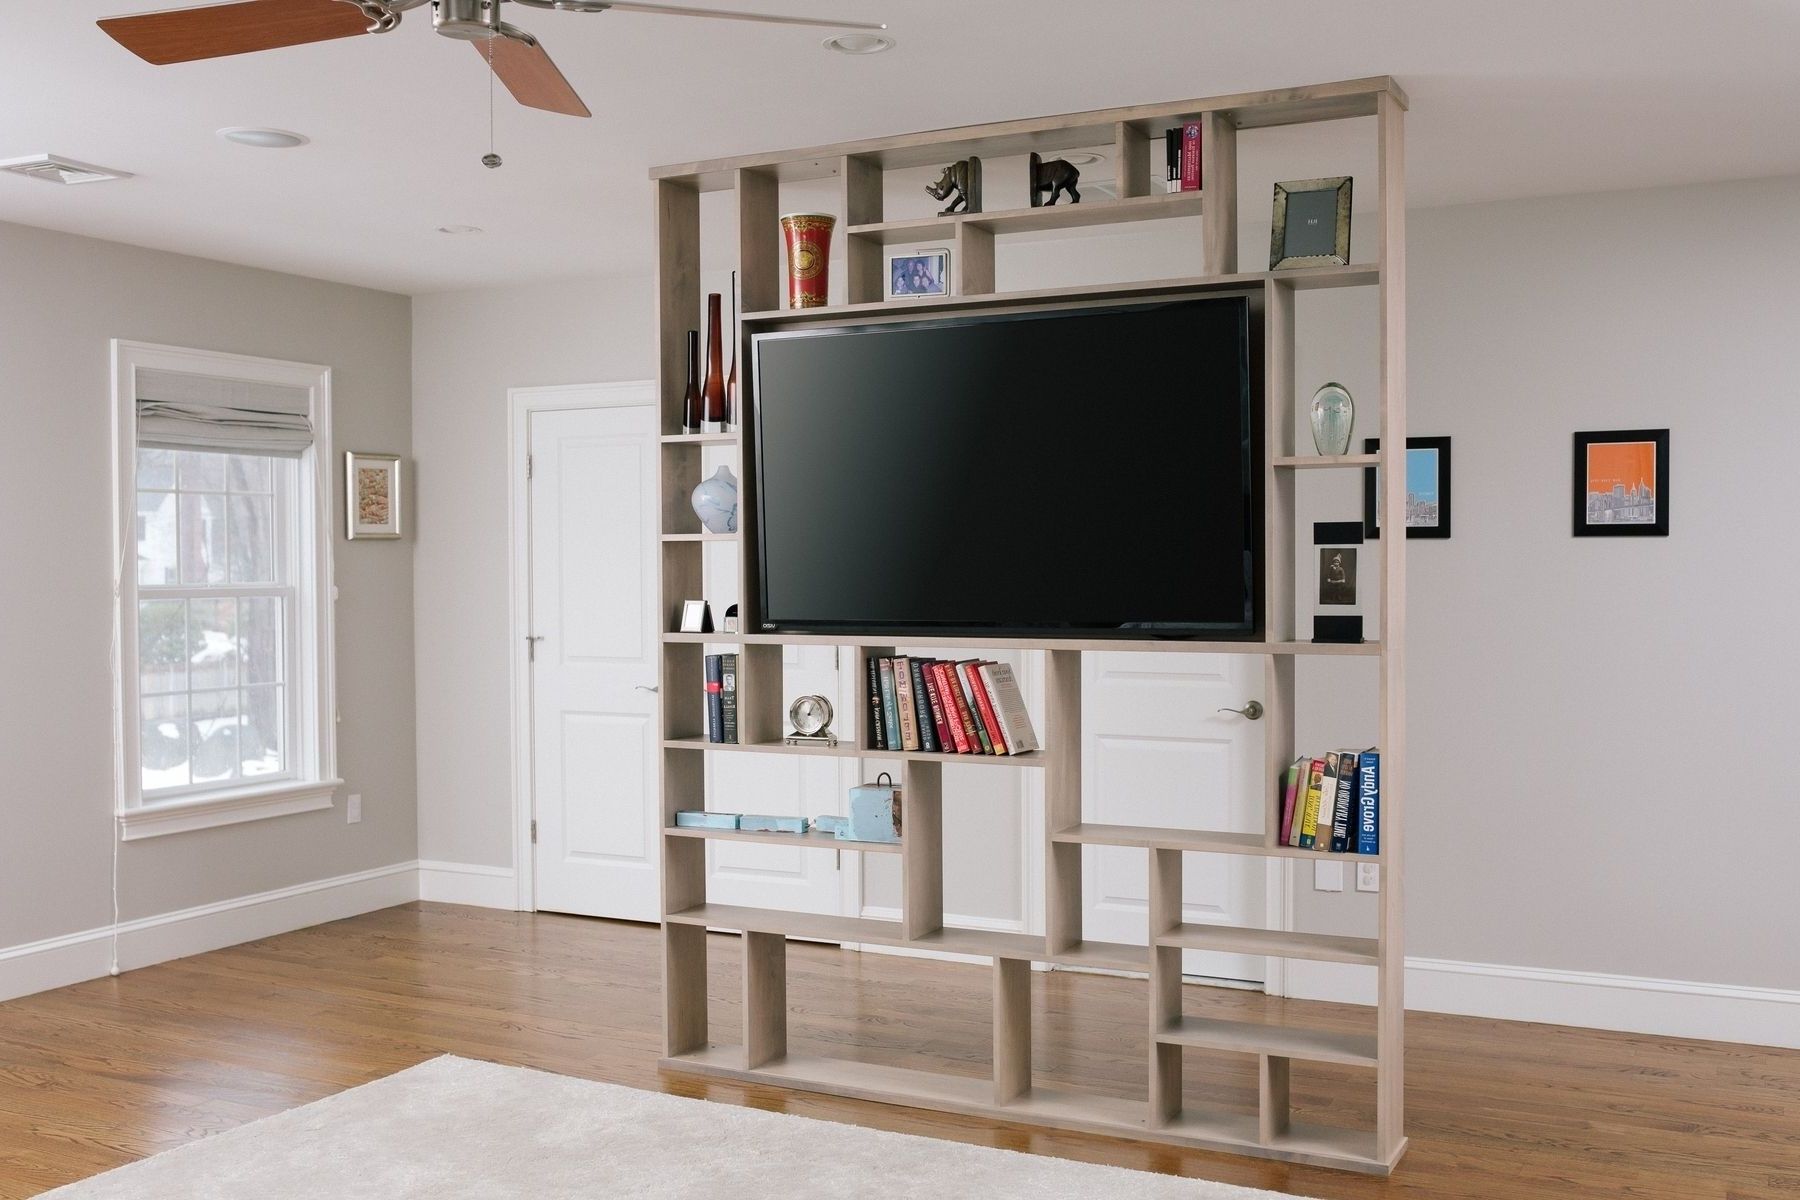 Current Hand Crafted Lexington Room Divider / Bookshelf / Tv Standcorl Regarding Bookcases With Tv Space (View 15 of 15)